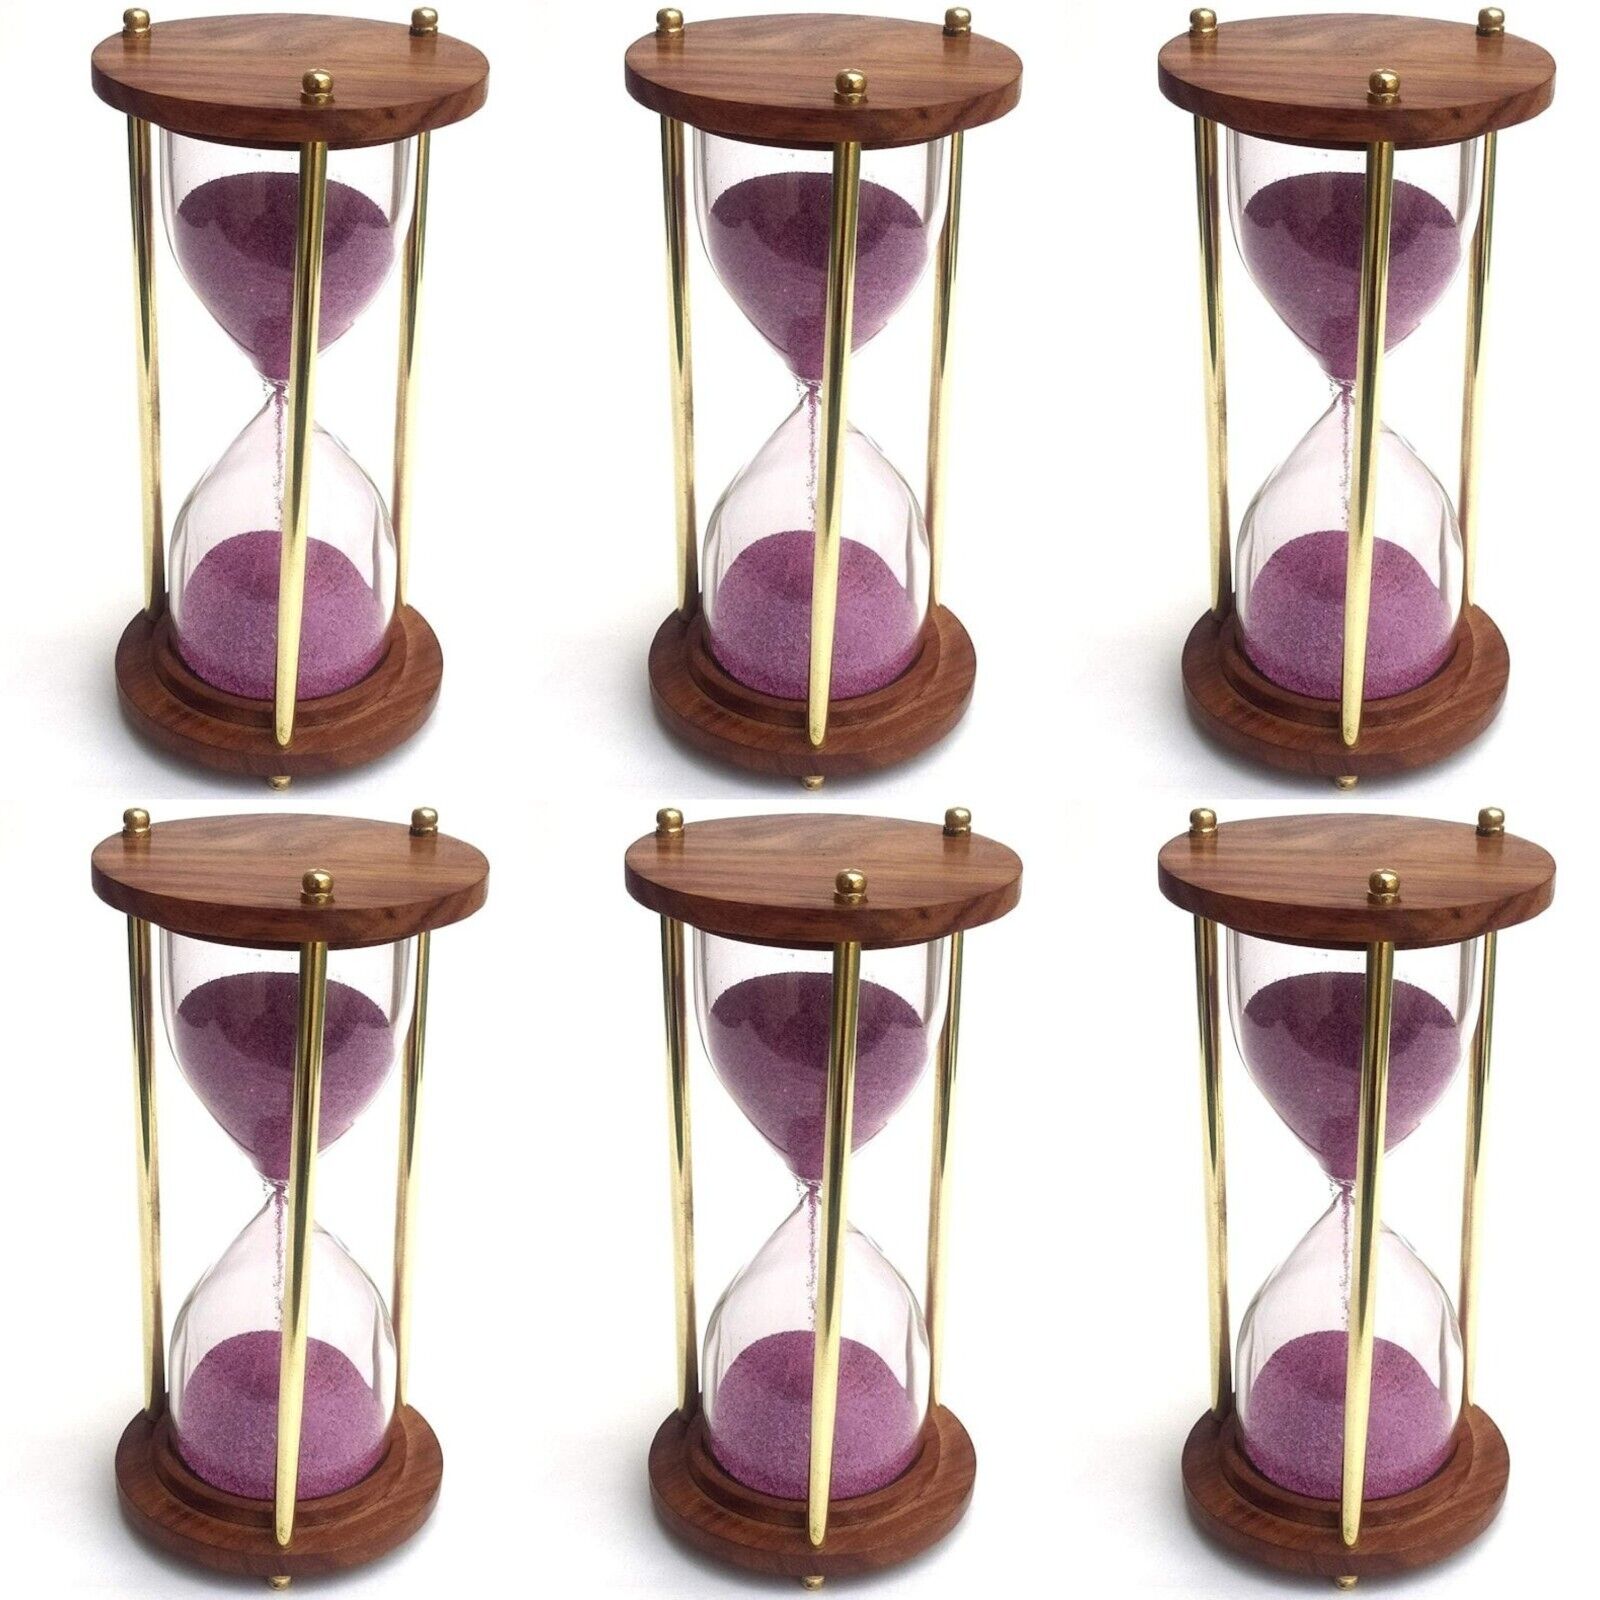 Set of 12 Wood sand timer 5 minute sand clock hourglass 6 inch nautical gift